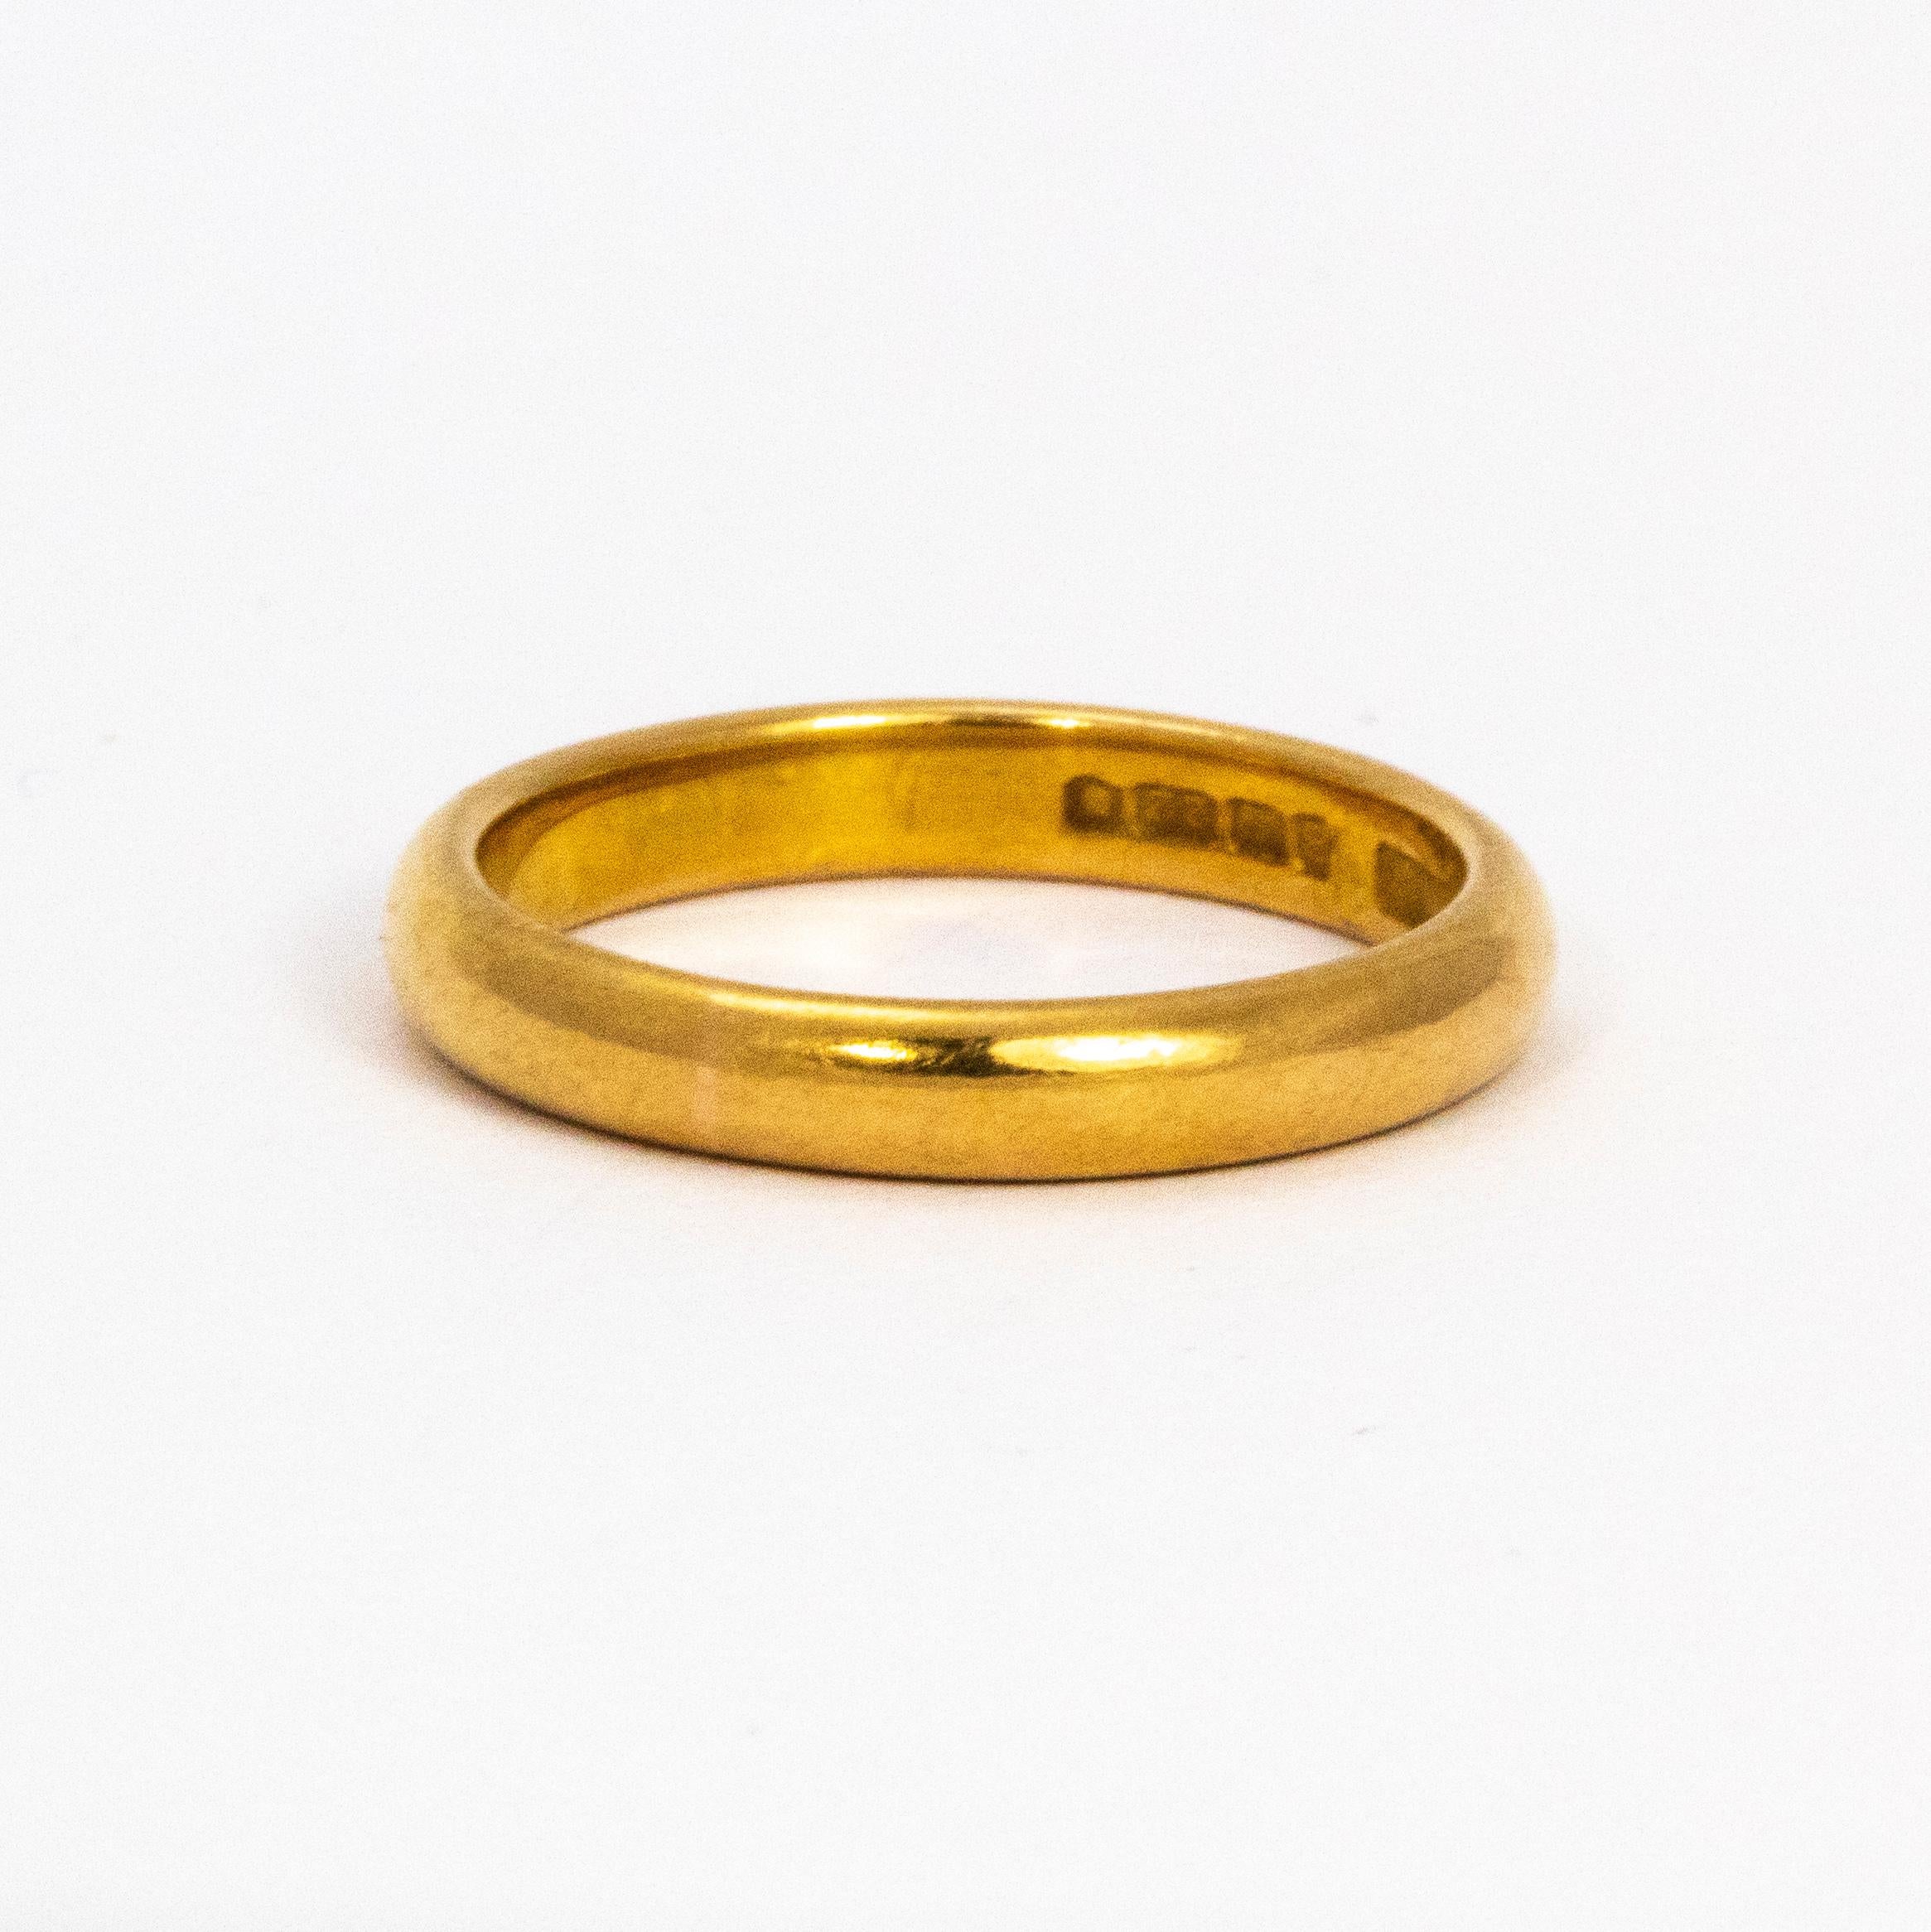 Glossy 22ct gold band, perfect for a wedding band or just a simple everyday piece.

Ring Size: M 1/2 or 6 1/2